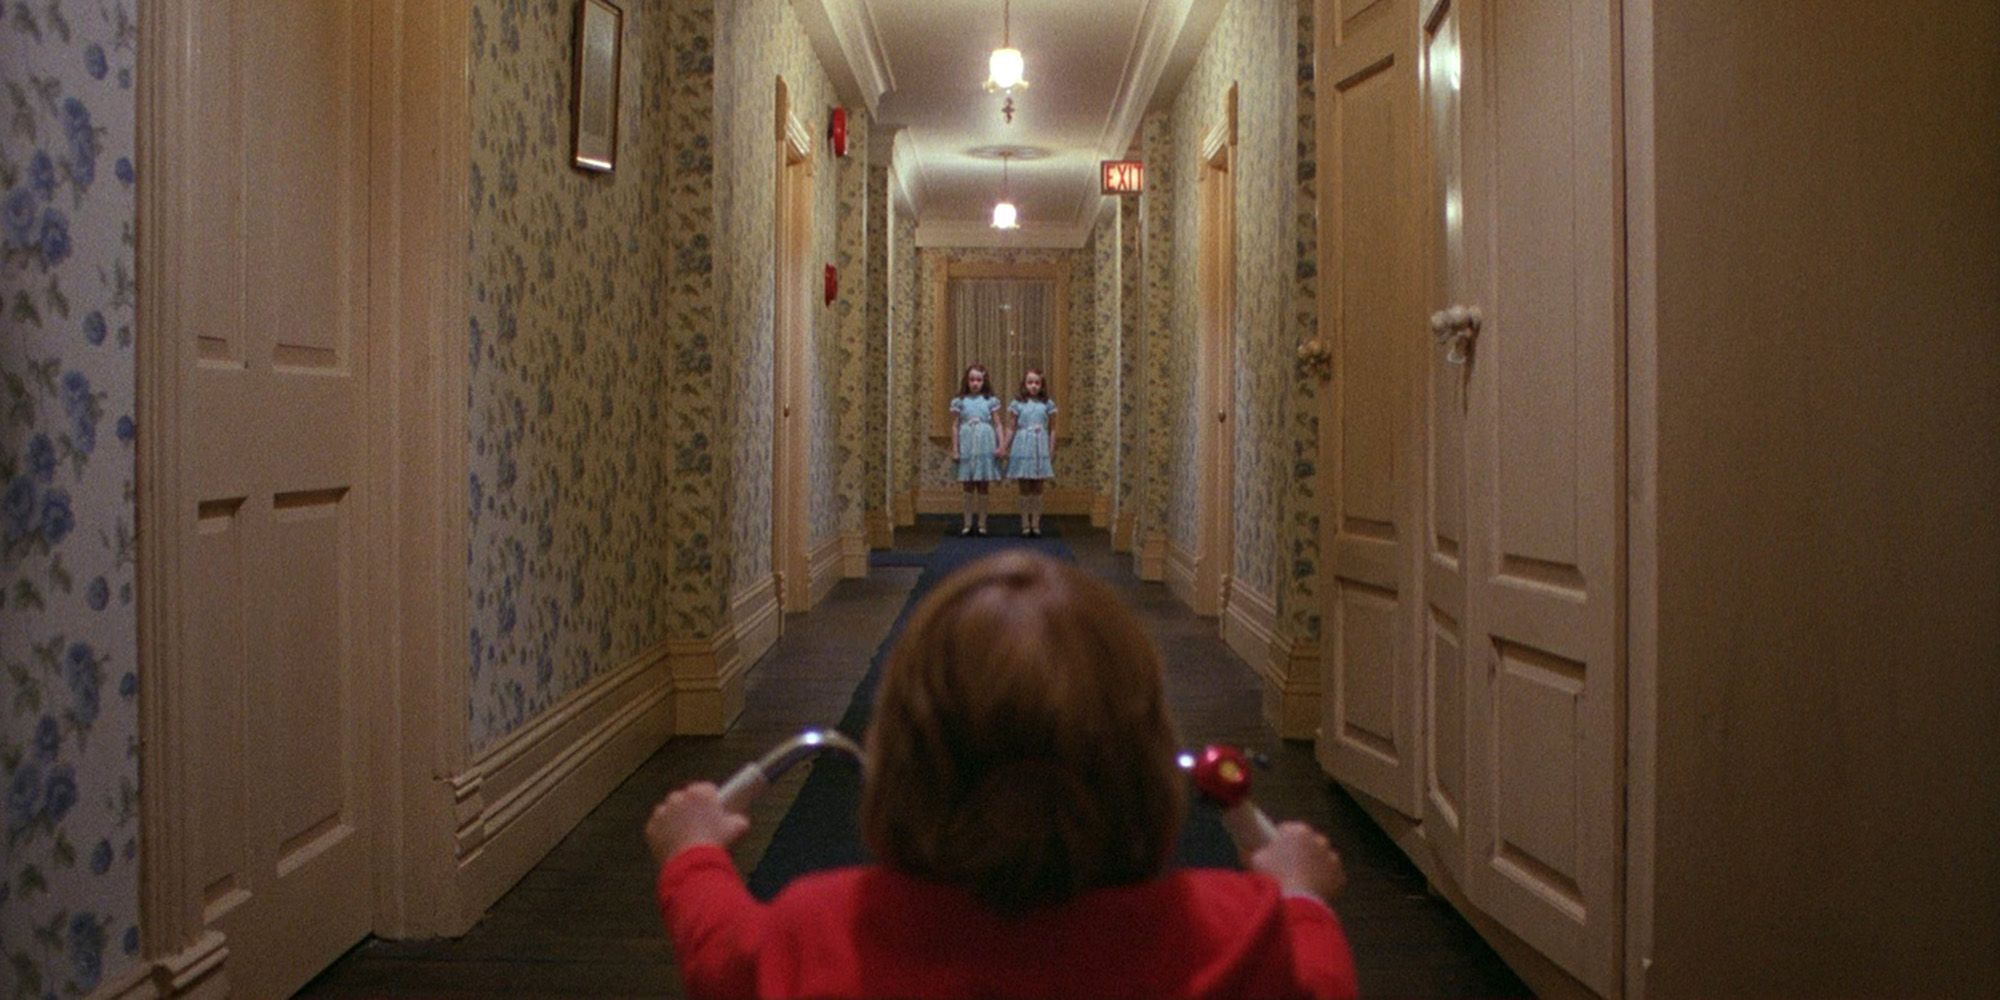 Danny looking at the twins in a hall of the Overlook Hotel from 'The Shining'